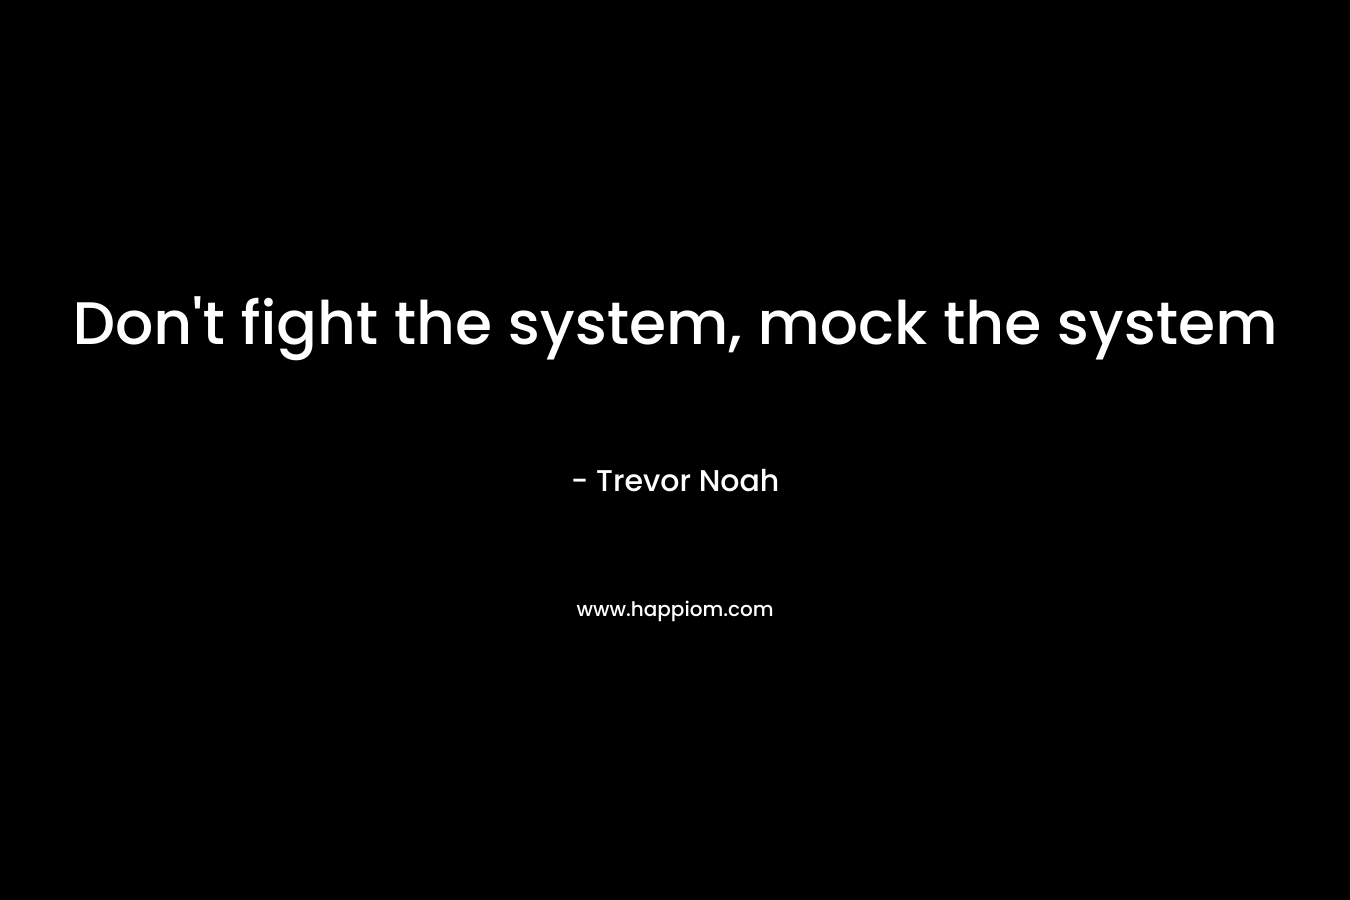 Don't fight the system, mock the system